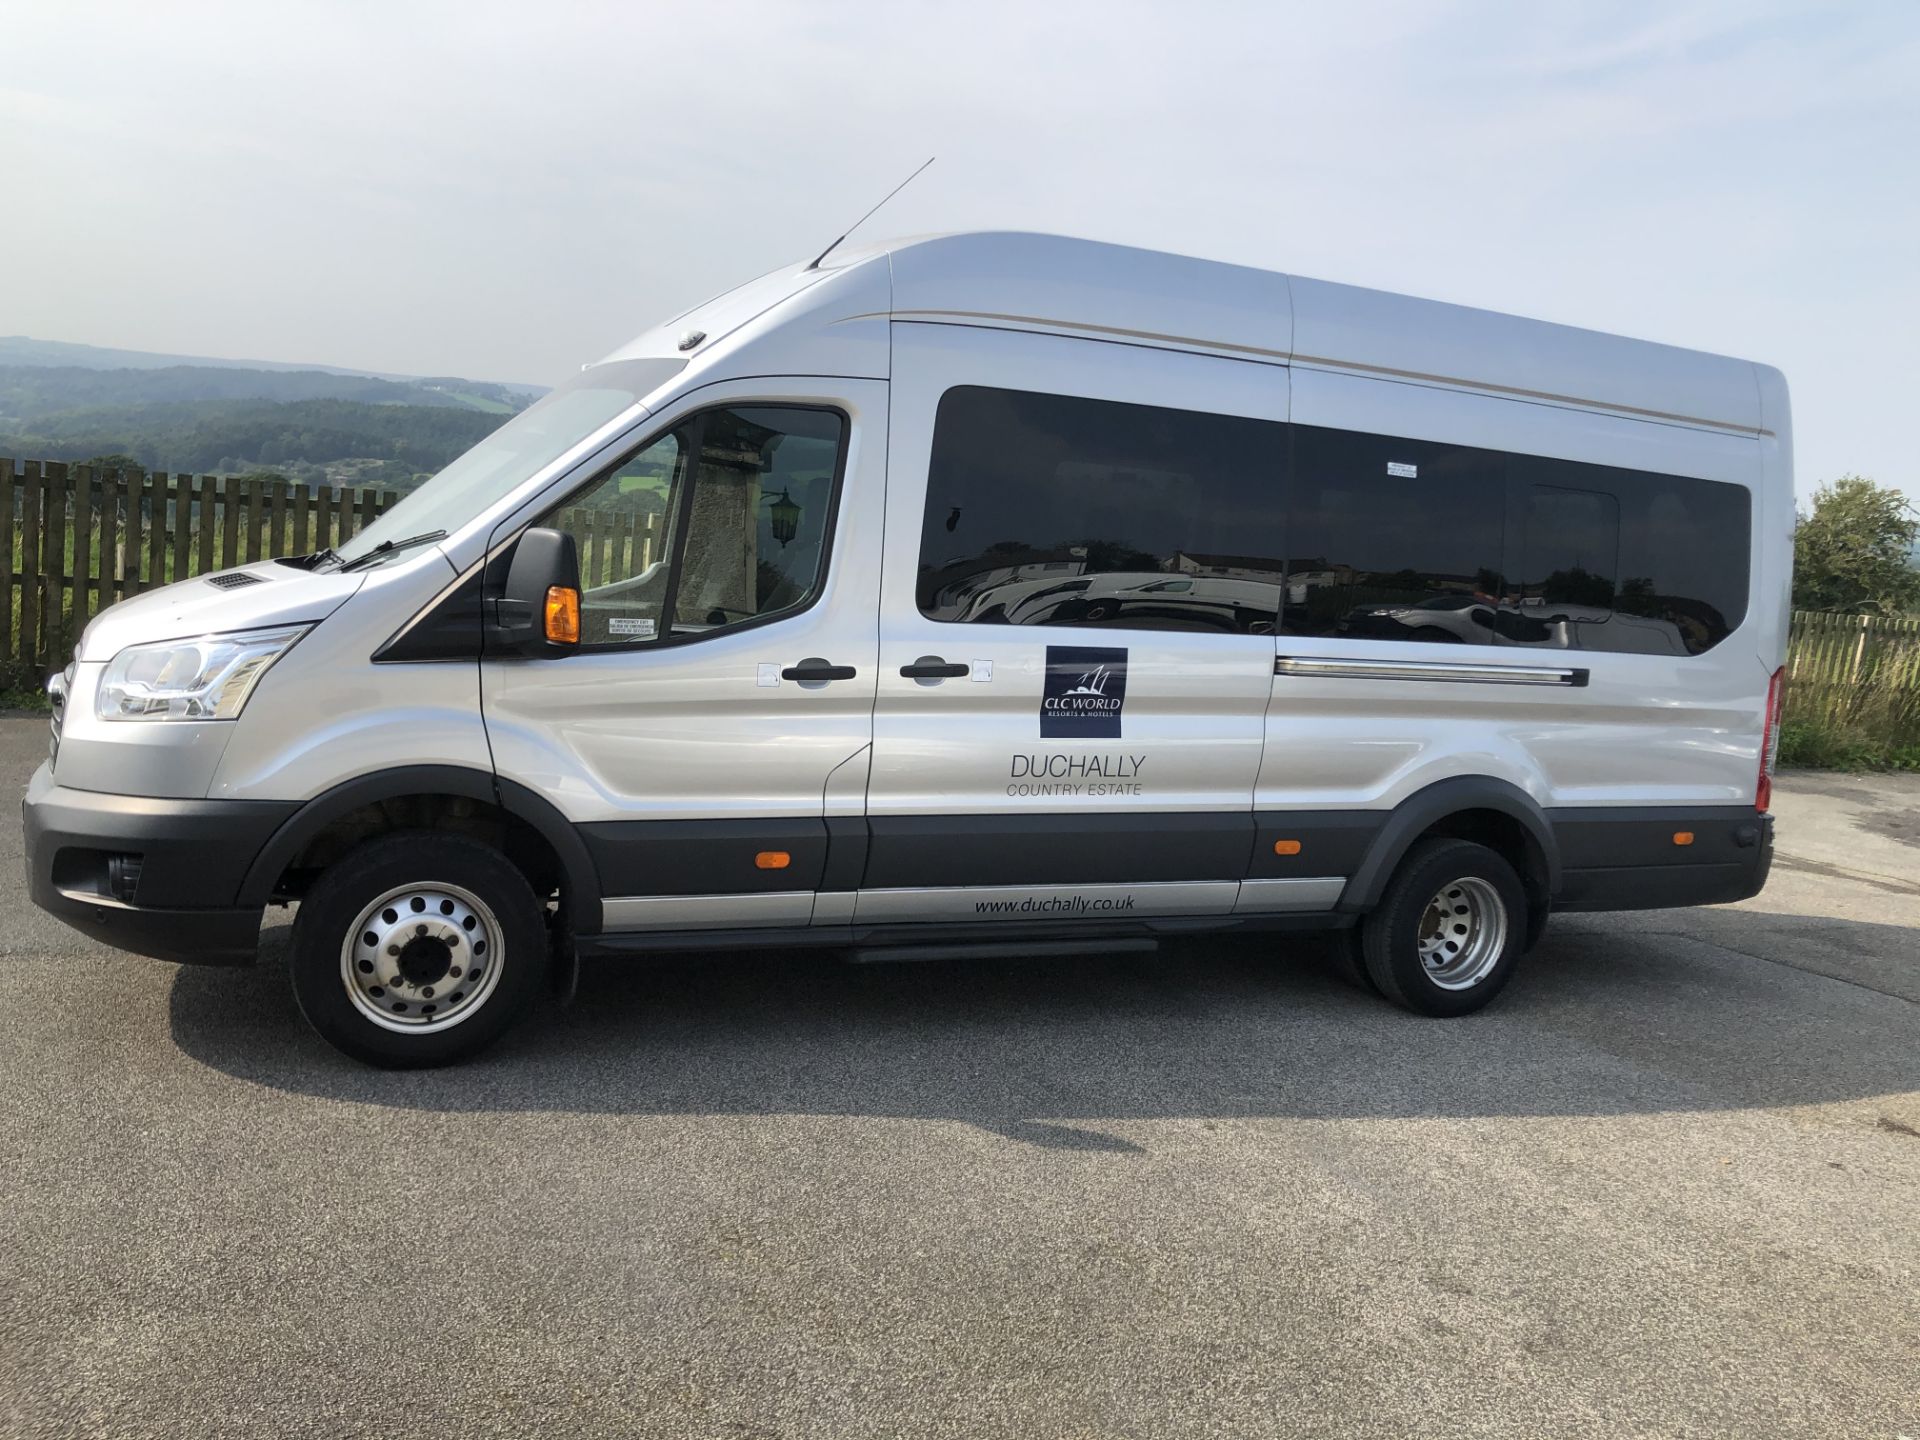 2017/17 REG FORD TRANSIT 460 TREND ECONETIC 2.2 DIESEL 17 SEAT MINIBUS, SHOWING 0 FORMER KEEPERS - Image 4 of 12